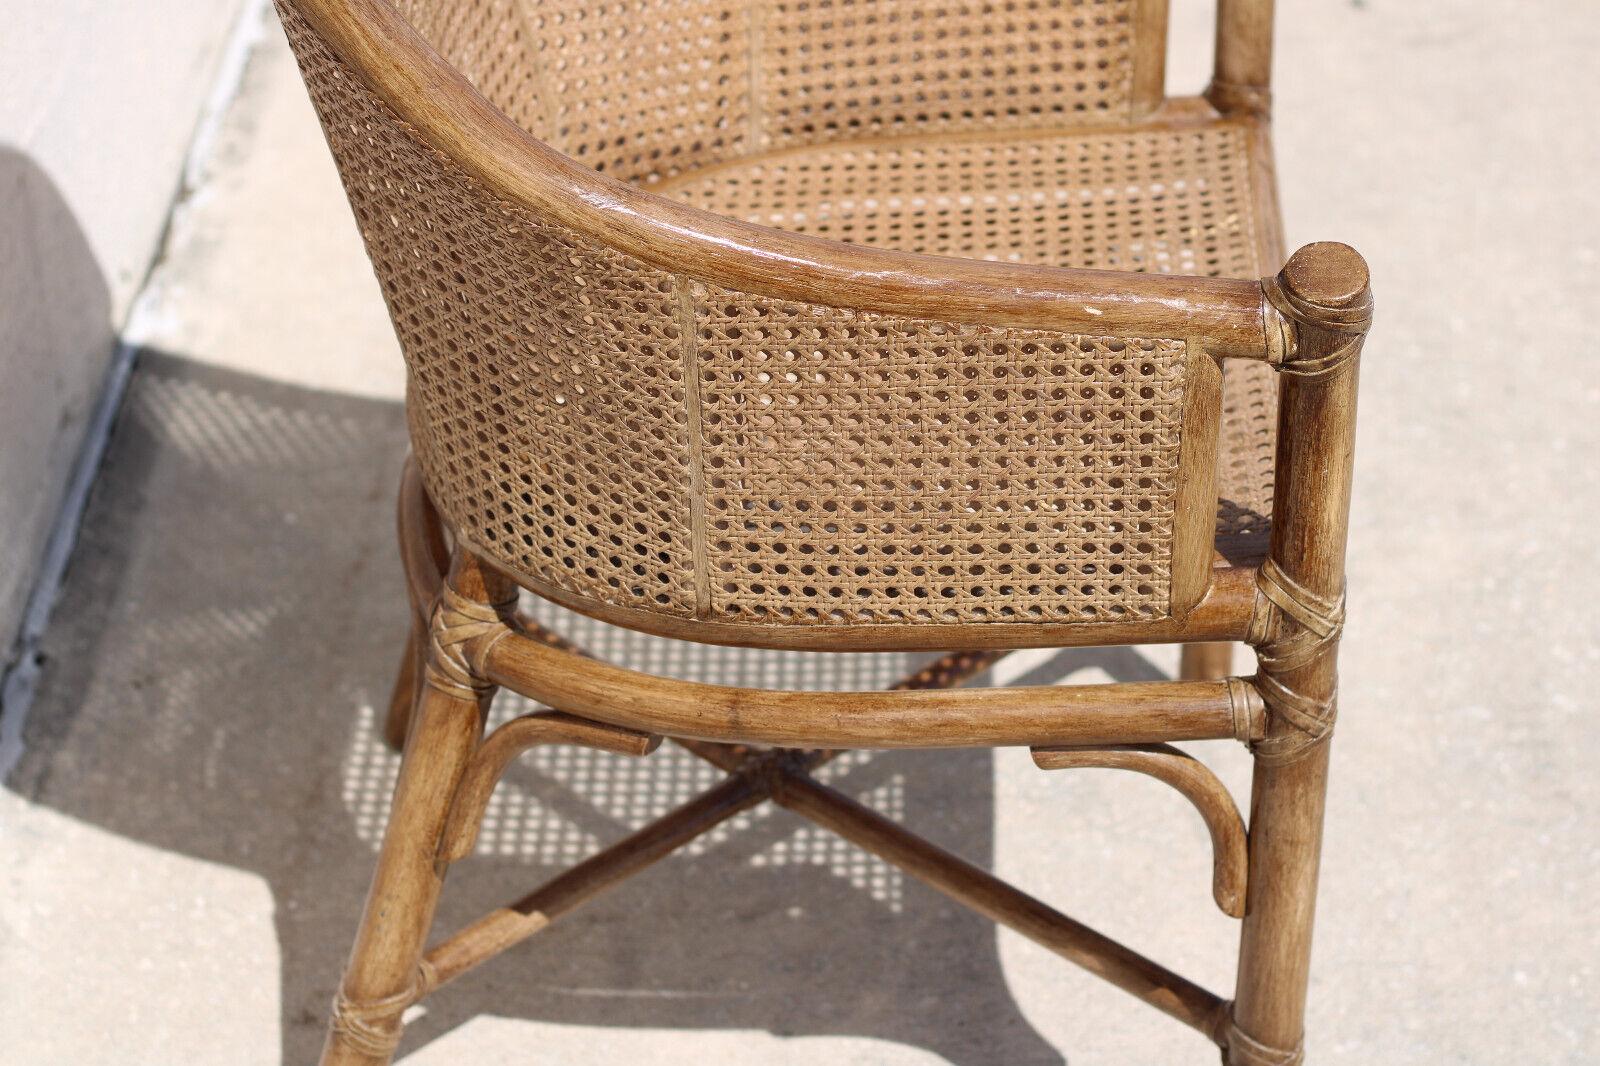 Elinor McGuire Rattan Caned Barrel Back Arm Chairs, a Pair For Sale 6